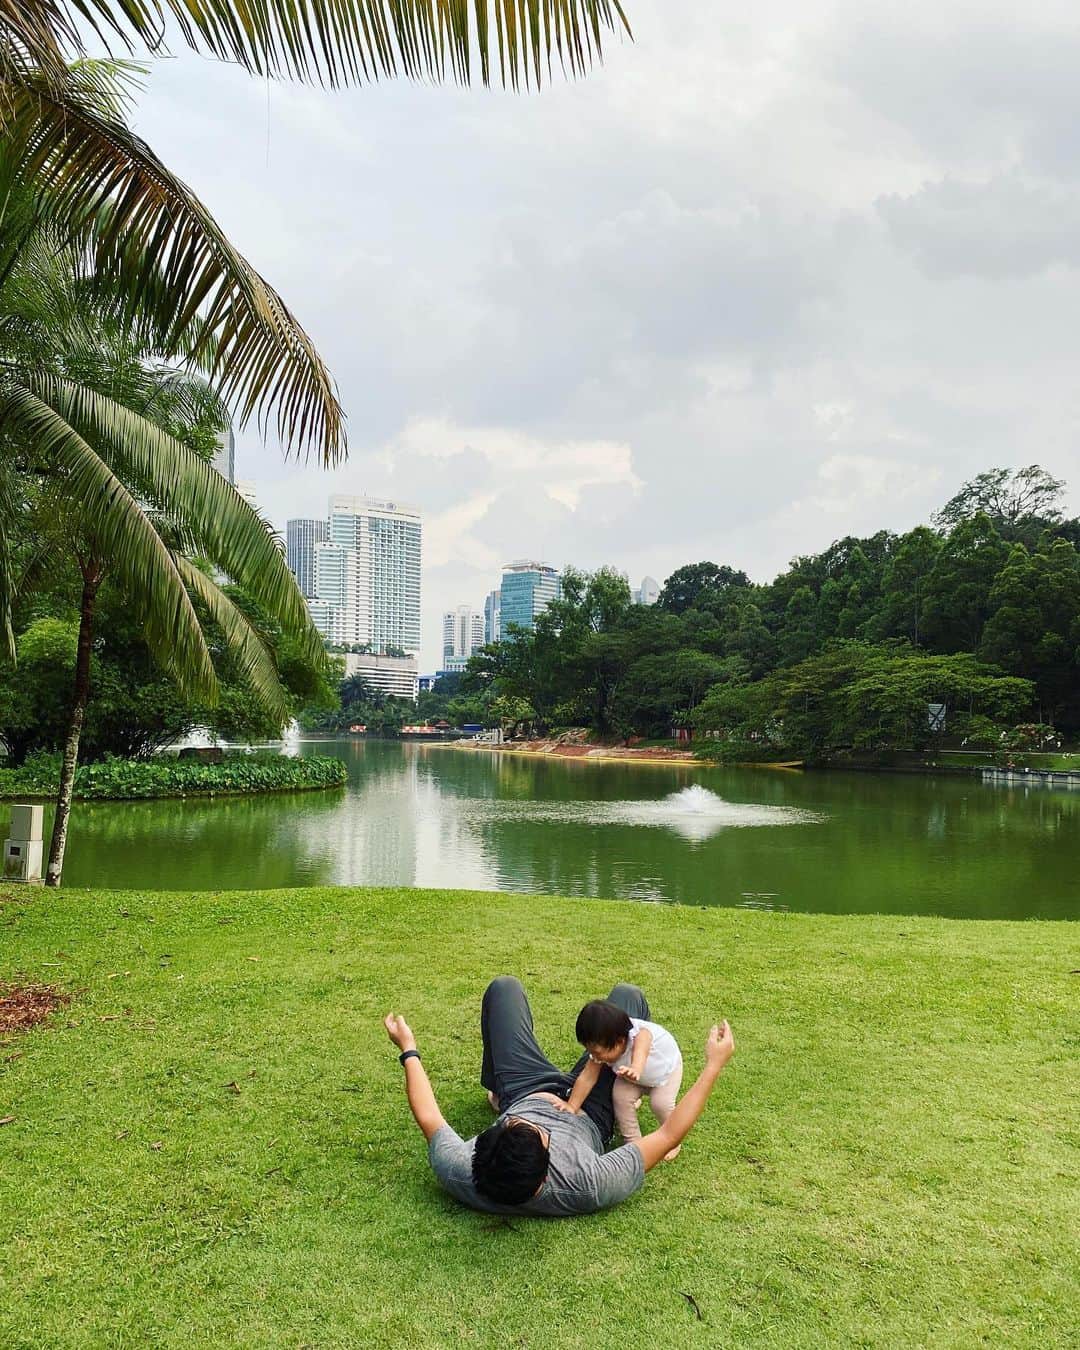 吉田ちかさんのインスタグラム写真 - (吉田ちかInstagram)「Went to the Perdana Botanical Gardens for a little picnic last night. It’s a huge park in the middle of KL and being a weekday and with a lot less people out these days, we pretty much had the lawn to ourselves! Pudding spends most of the day indoors at preschool so she was super excited to be able to run around and go wild!﻿ ﻿ Thank you guys for all the comments on yesterday’s video. I know a lot of you guys are stuck at home and may not be able to do a lot right now. We’re definitely not as active as we usually are, but things seem to be a bit calmer here in Malaysia so I hope our posts give you a  break and a bit of positive energy :) ﻿ ﻿ クアラルンプールのど真ん中にある巨大な植物園でちょっとしたピクニック😊 平日で人も少なく、芝生はほぼ貸し切り状態！保育園はずっと室内なので、外でのびのびと遊べてプリンも大喜び☆﻿ ﻿ 昨日アップした動画に沢山のコメントをありがとうございました！このようなセンシティブな内容について発信をするのは結構勇気がいるのですが、自分たちの現状について、私たちの考え方を皆さんと共有できてよかったです！﻿ ﻿ 日曜日からフードウィークが始まりますが🤤その前にもう一本！おさるさんの英語力アッププロジェクトの経過報告？を今夜アップします🙈 お家から出れない方も沢山いると思います。私たちもいつもに比べるとだいぶ大人しくしていますが、クアラルンプールは比較的落ち着いているので、私たちの投稿が少しでも皆さんに元気を与えられますように！﻿ ﻿ #髪がぐちゃぐちゃ #根元やばい #子育てしながら自分のメンテナンス #大事だけど大変😅」3月13日 18時55分 - bilingirl_chika